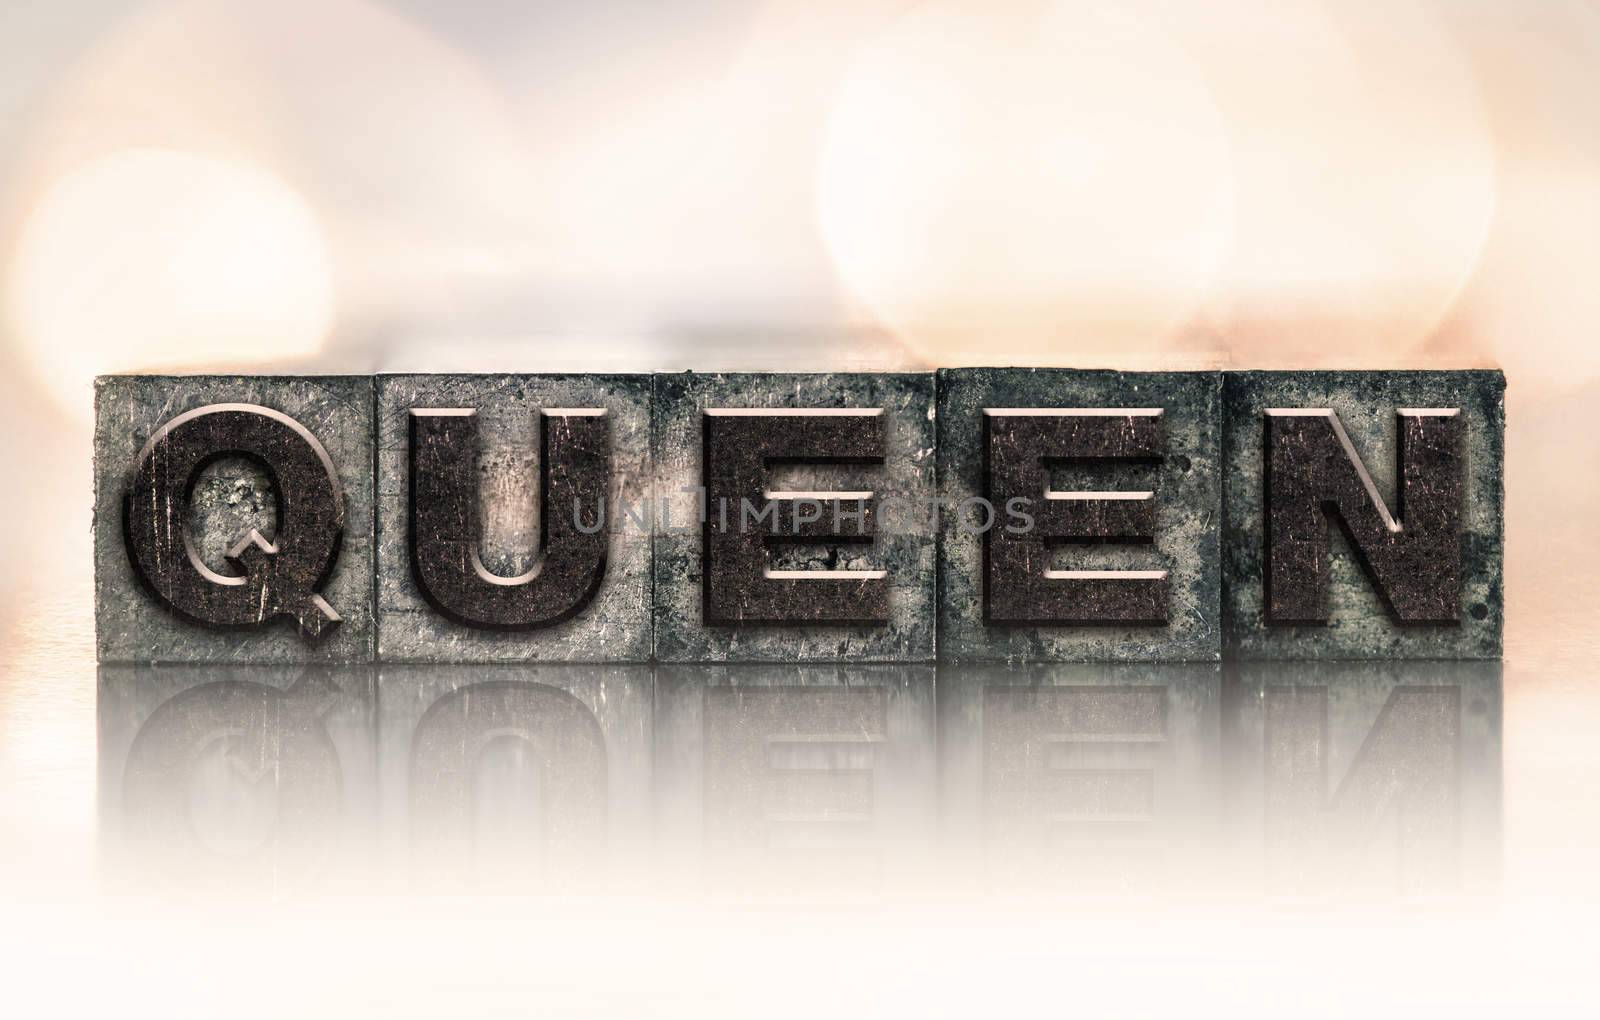 The word "QUEEN" written in vintage ink stained letterpress type.